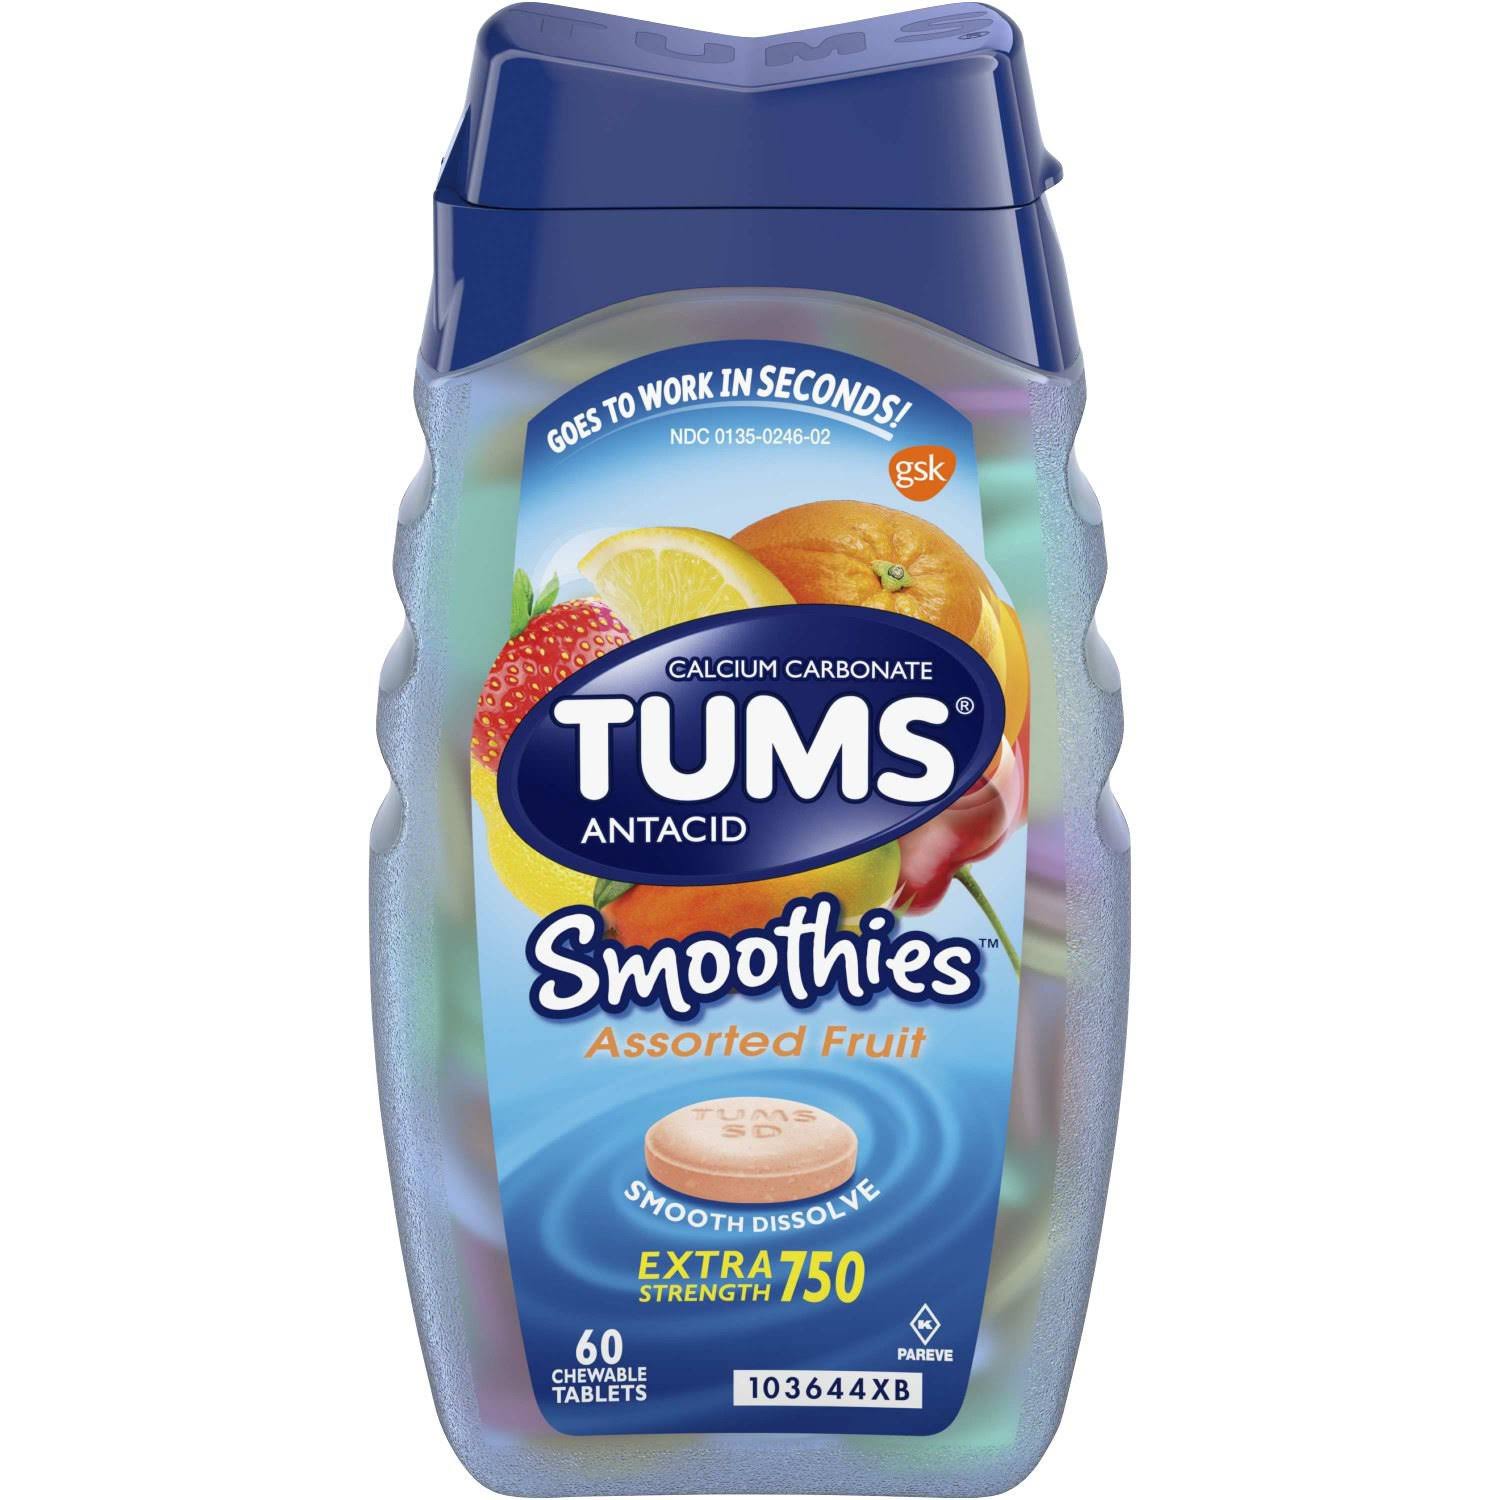 Tums Smoothies Extra Strength 750 - 60 Tablets